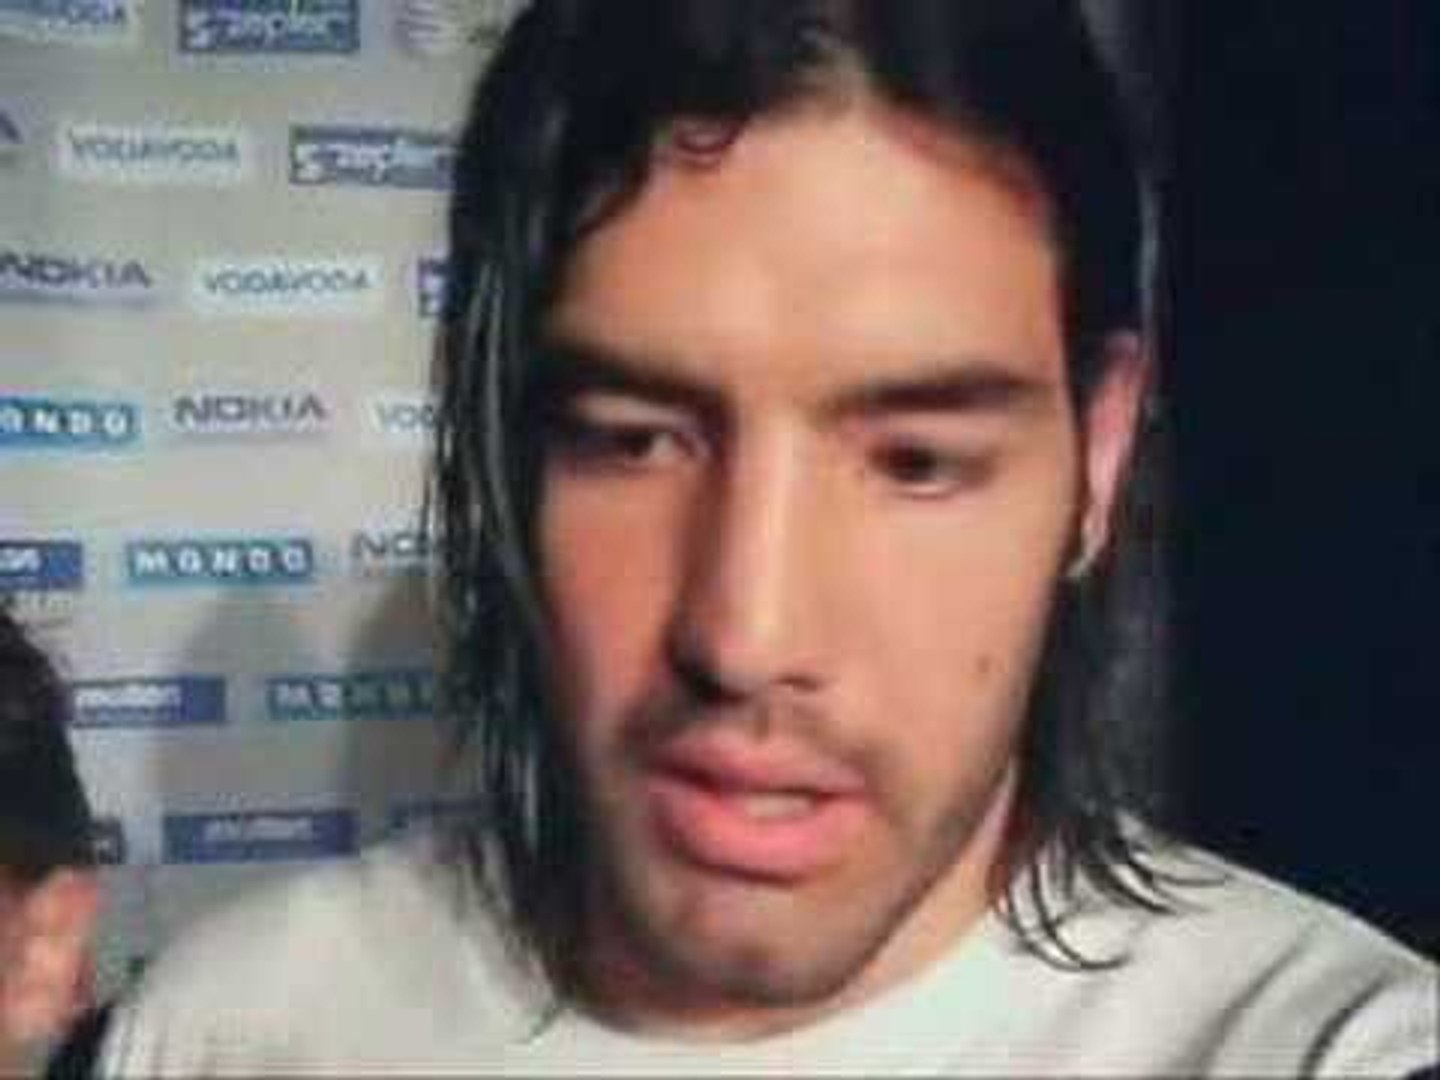 Q&A With Luis Scola